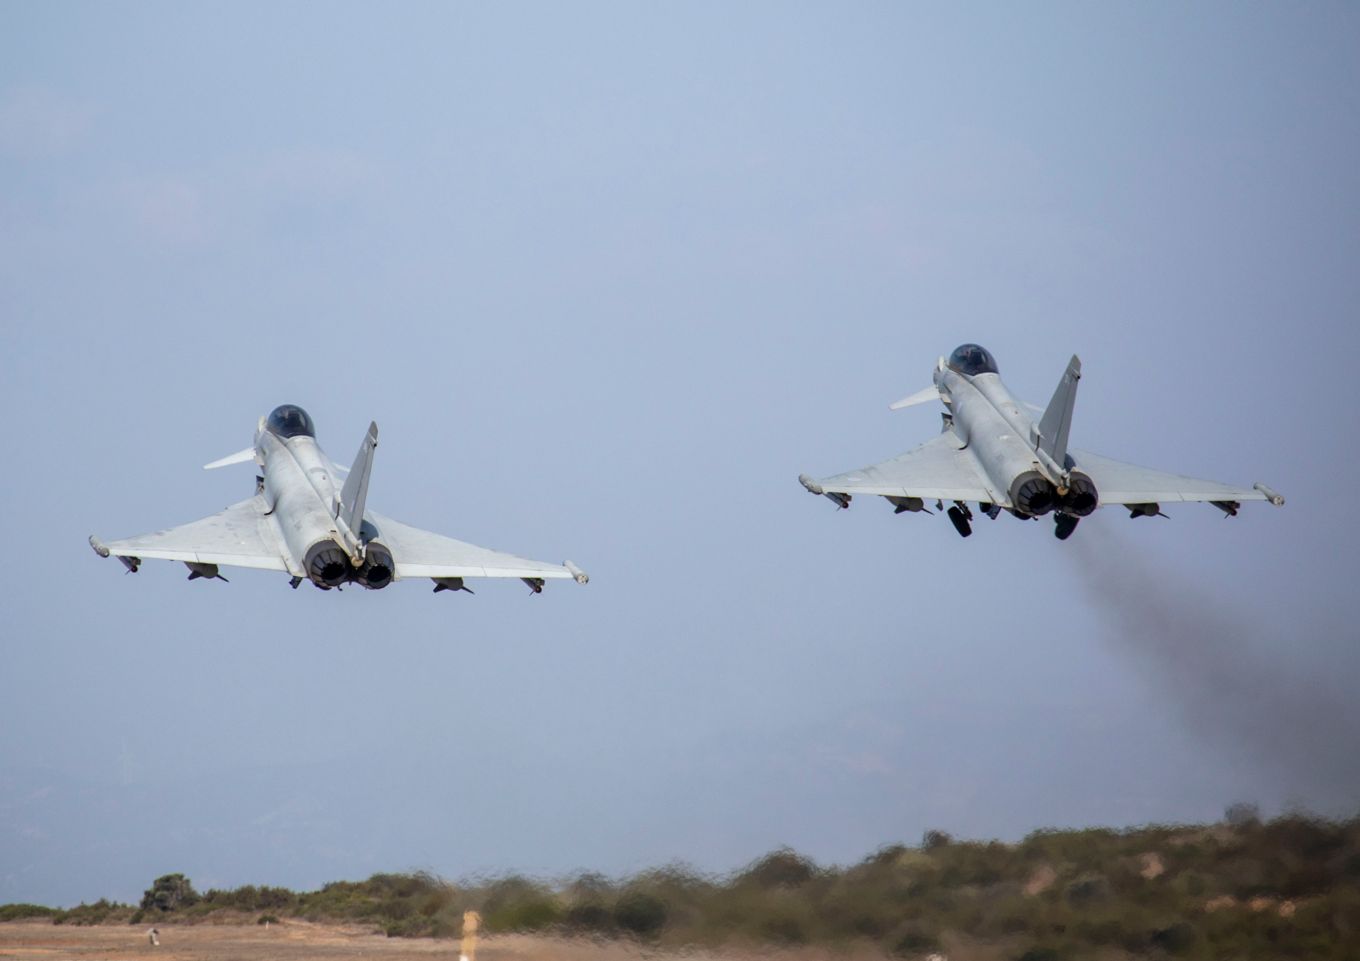 Image shows two RAF Typhoons taking off.